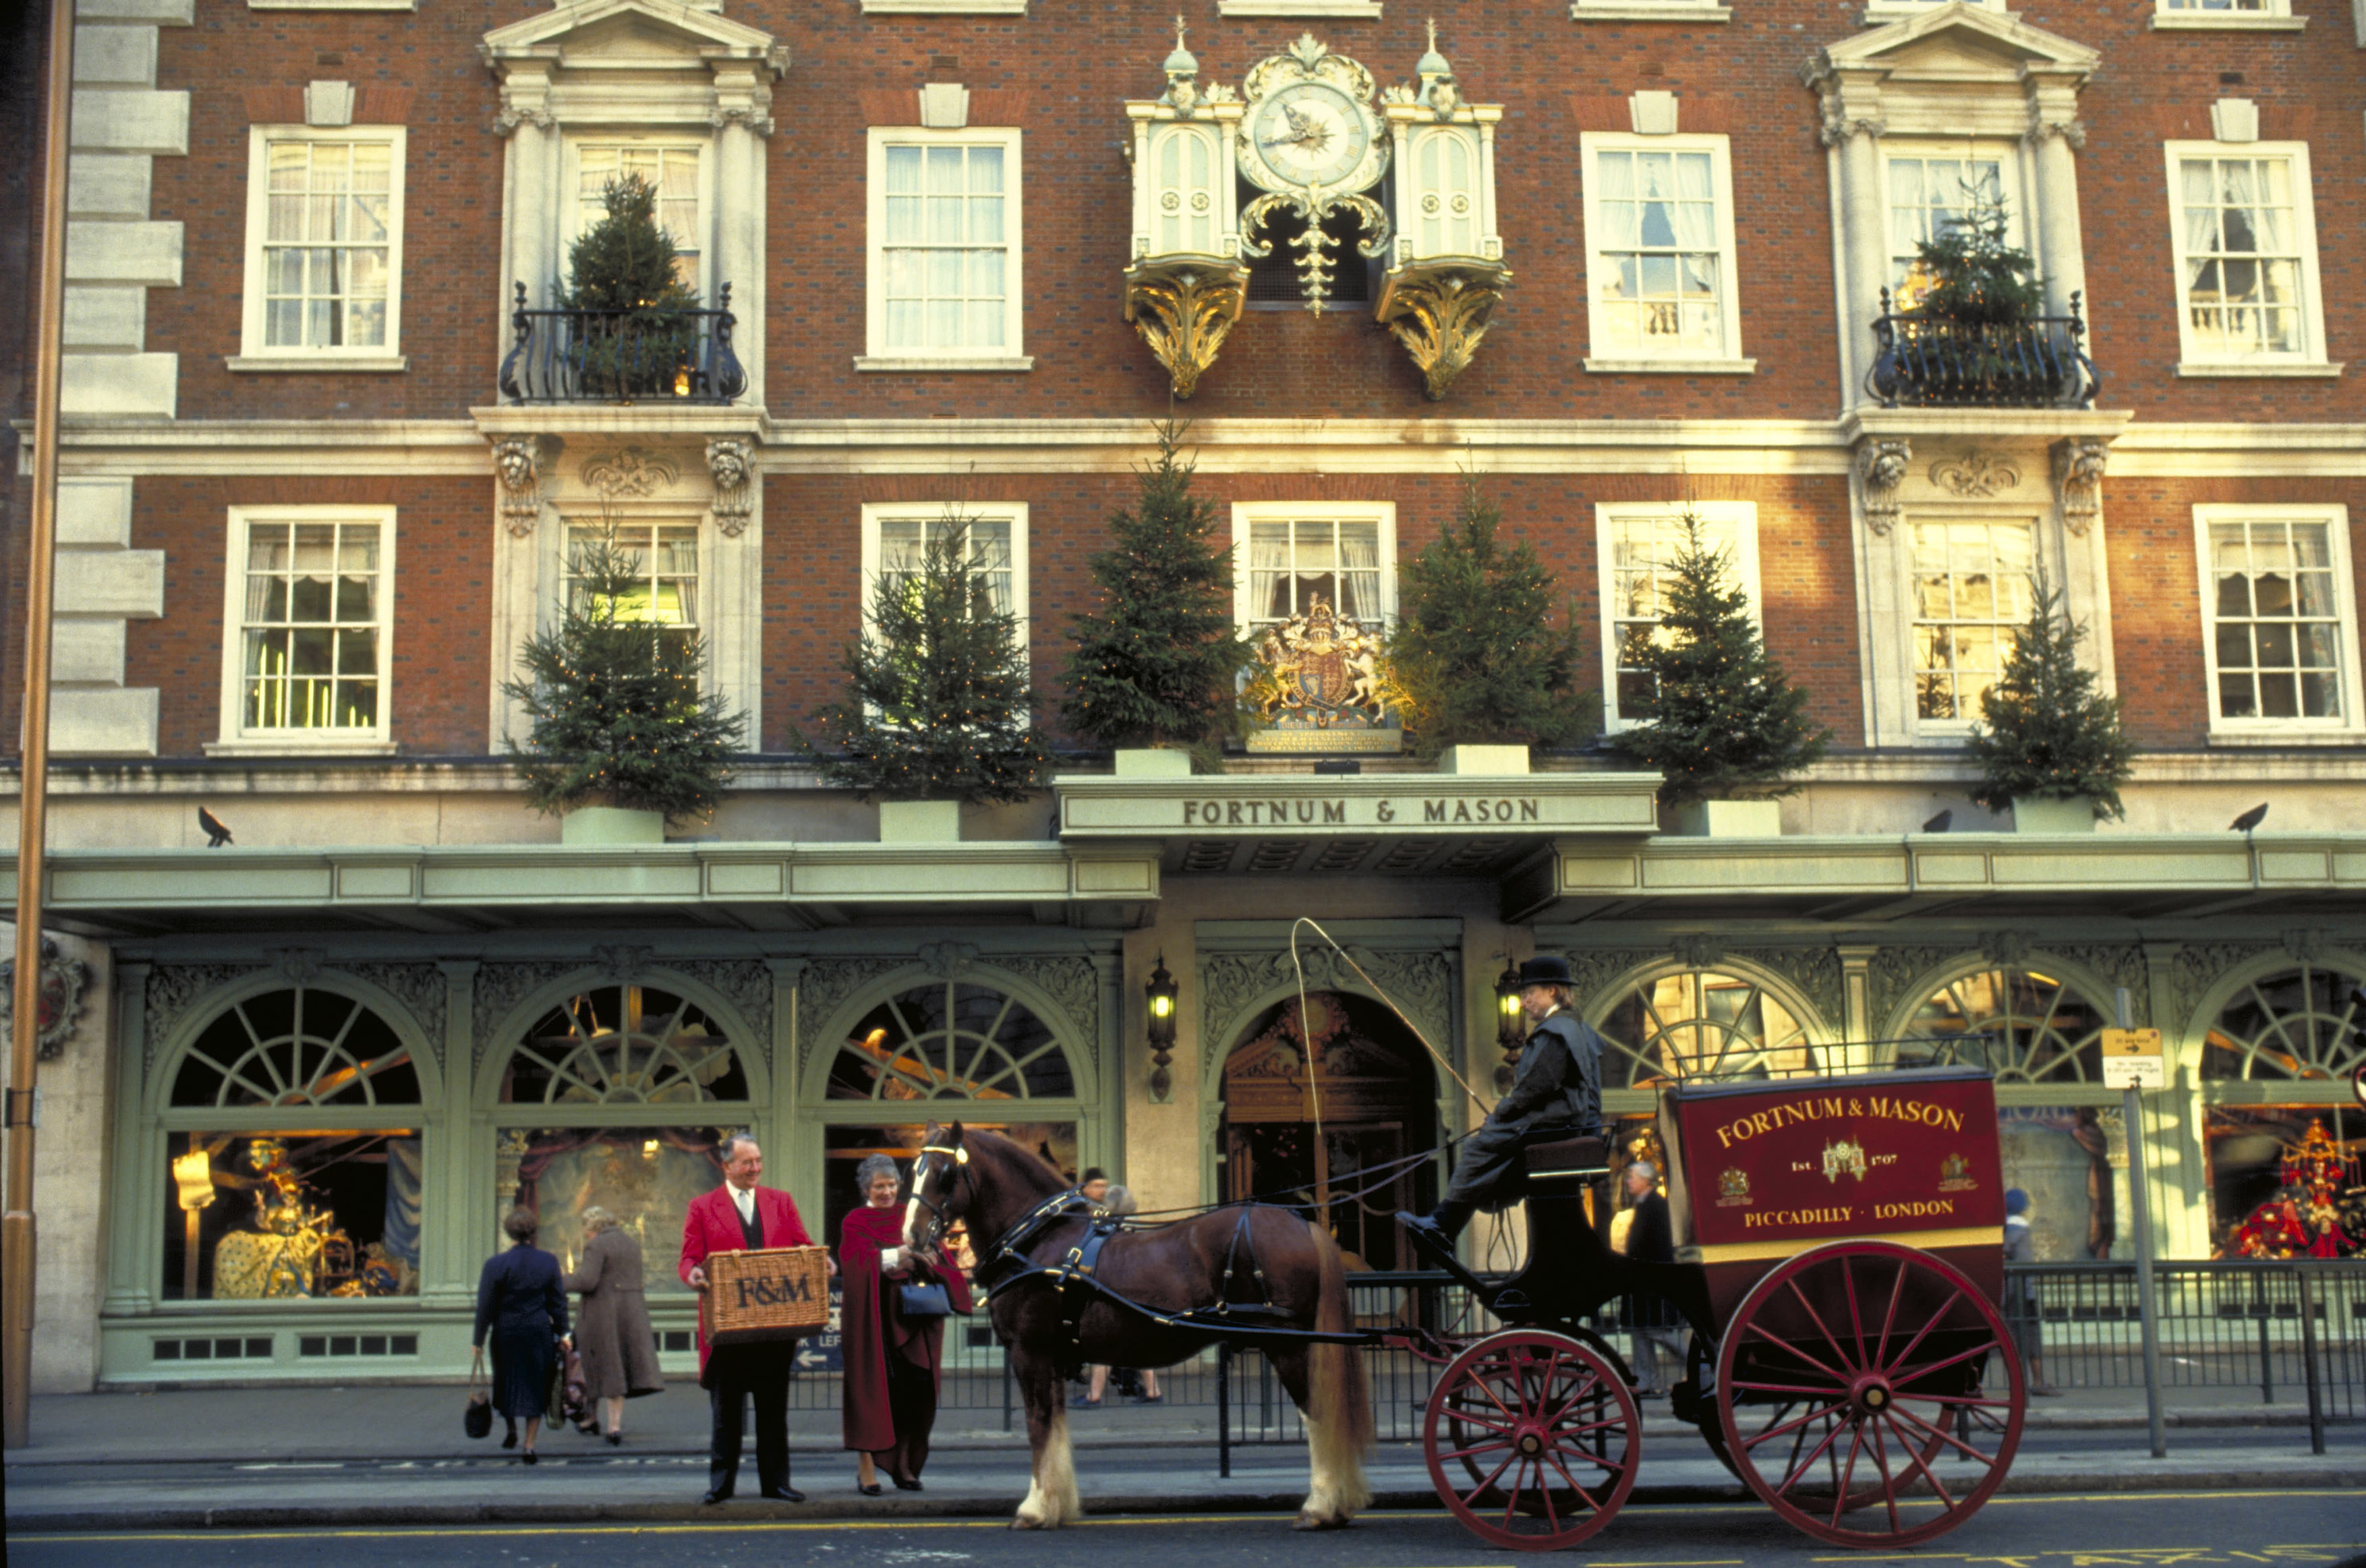 Horse and carriage outside Fortnum and Masons, Piccadilly, London, London, England.